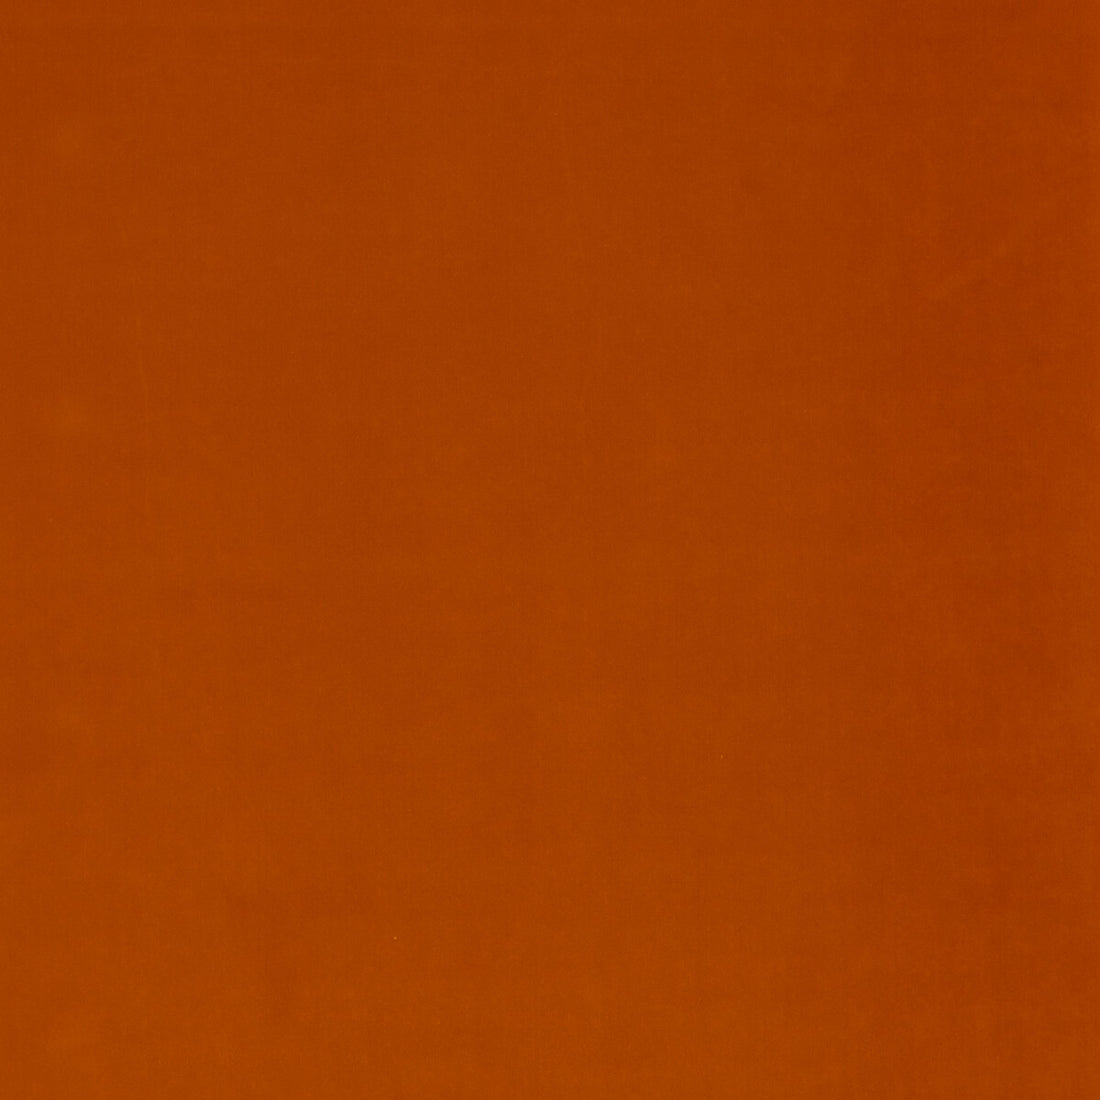 Mulberry Velvet fabric in spice color - pattern FD800.T30.0 - by Mulberry in the Mulberry Velvet collection